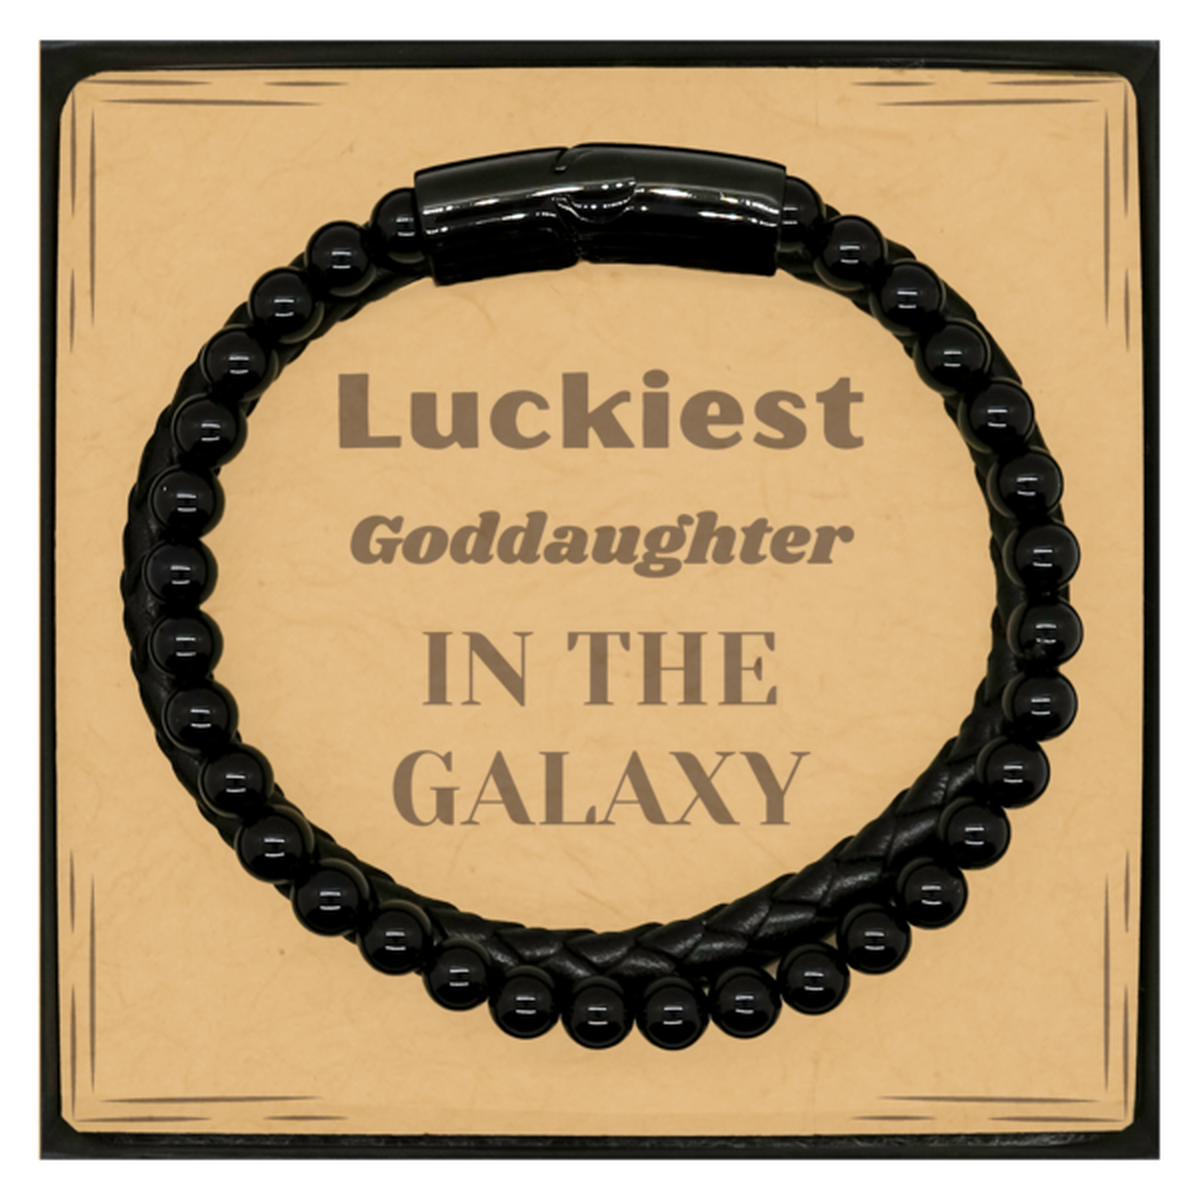 Luckiest Goddaughter in the Galaxy, To My Goddaughter Message Card Gifts, Christmas Goddaughter Stone Leather Bracelets Gifts, X-mas Birthday Unique Gifts For Goddaughter Men Women